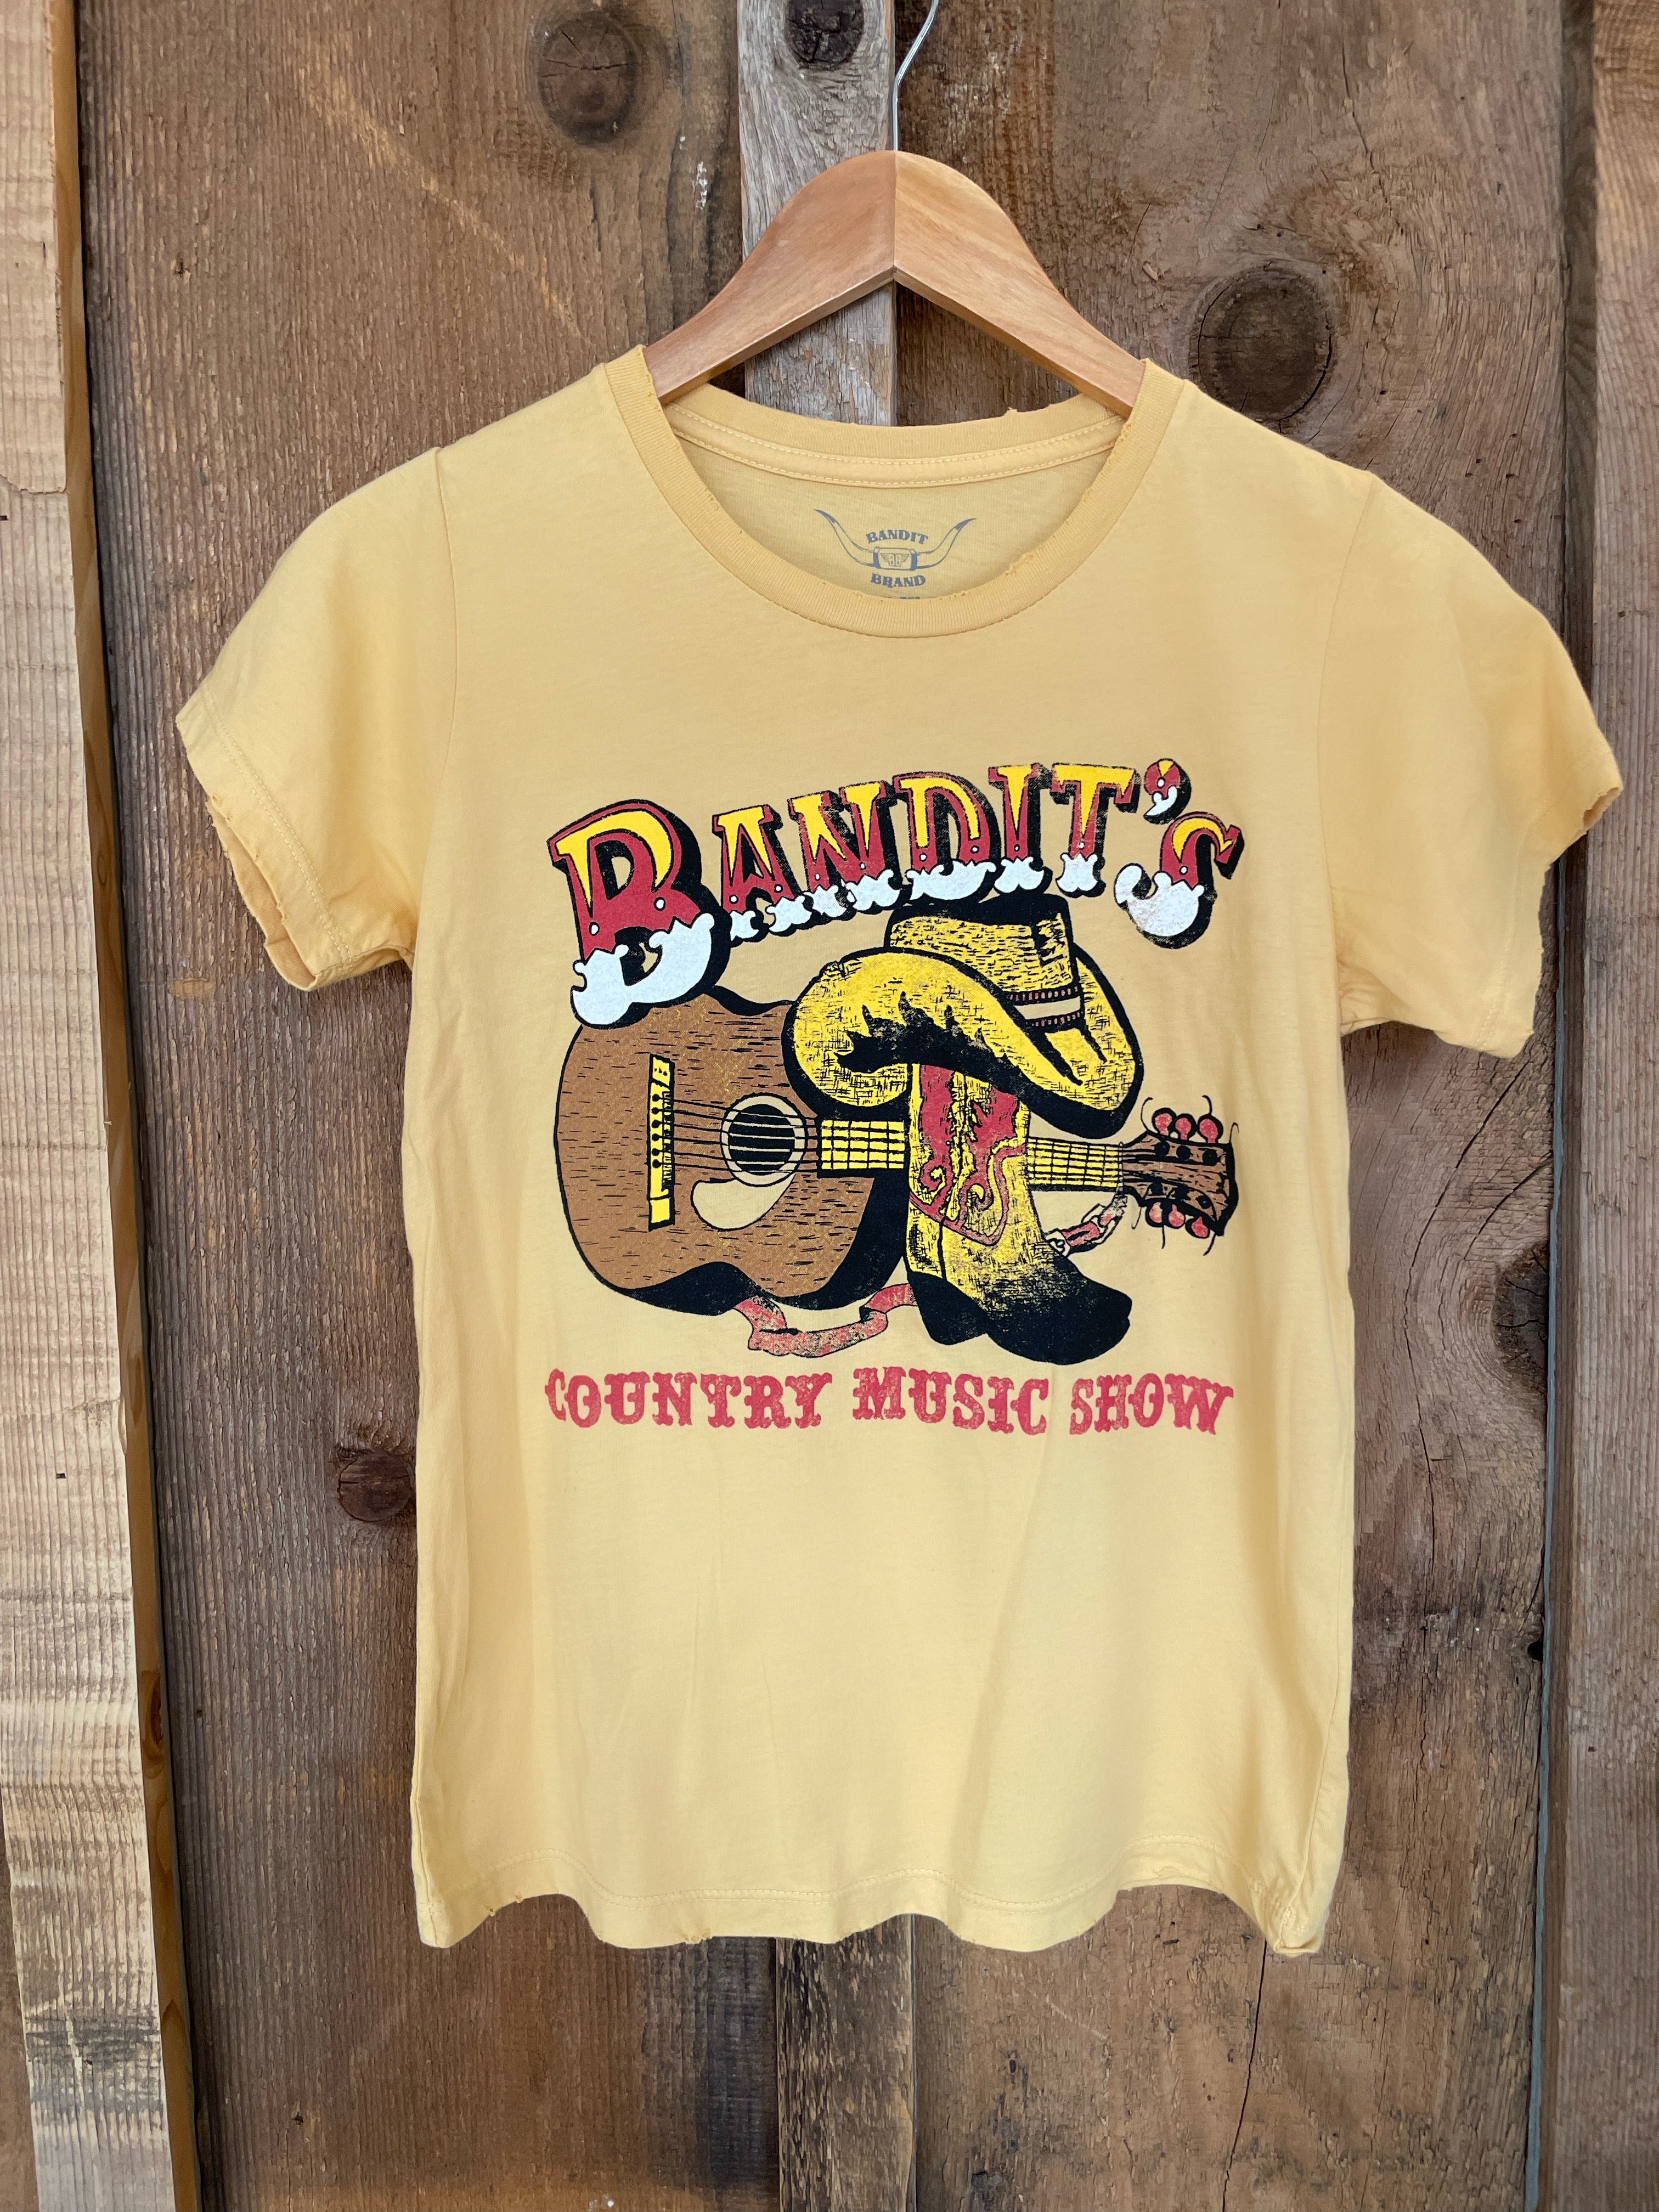 Bandit's Country Music Show Womens Tee Gold Dust/Color